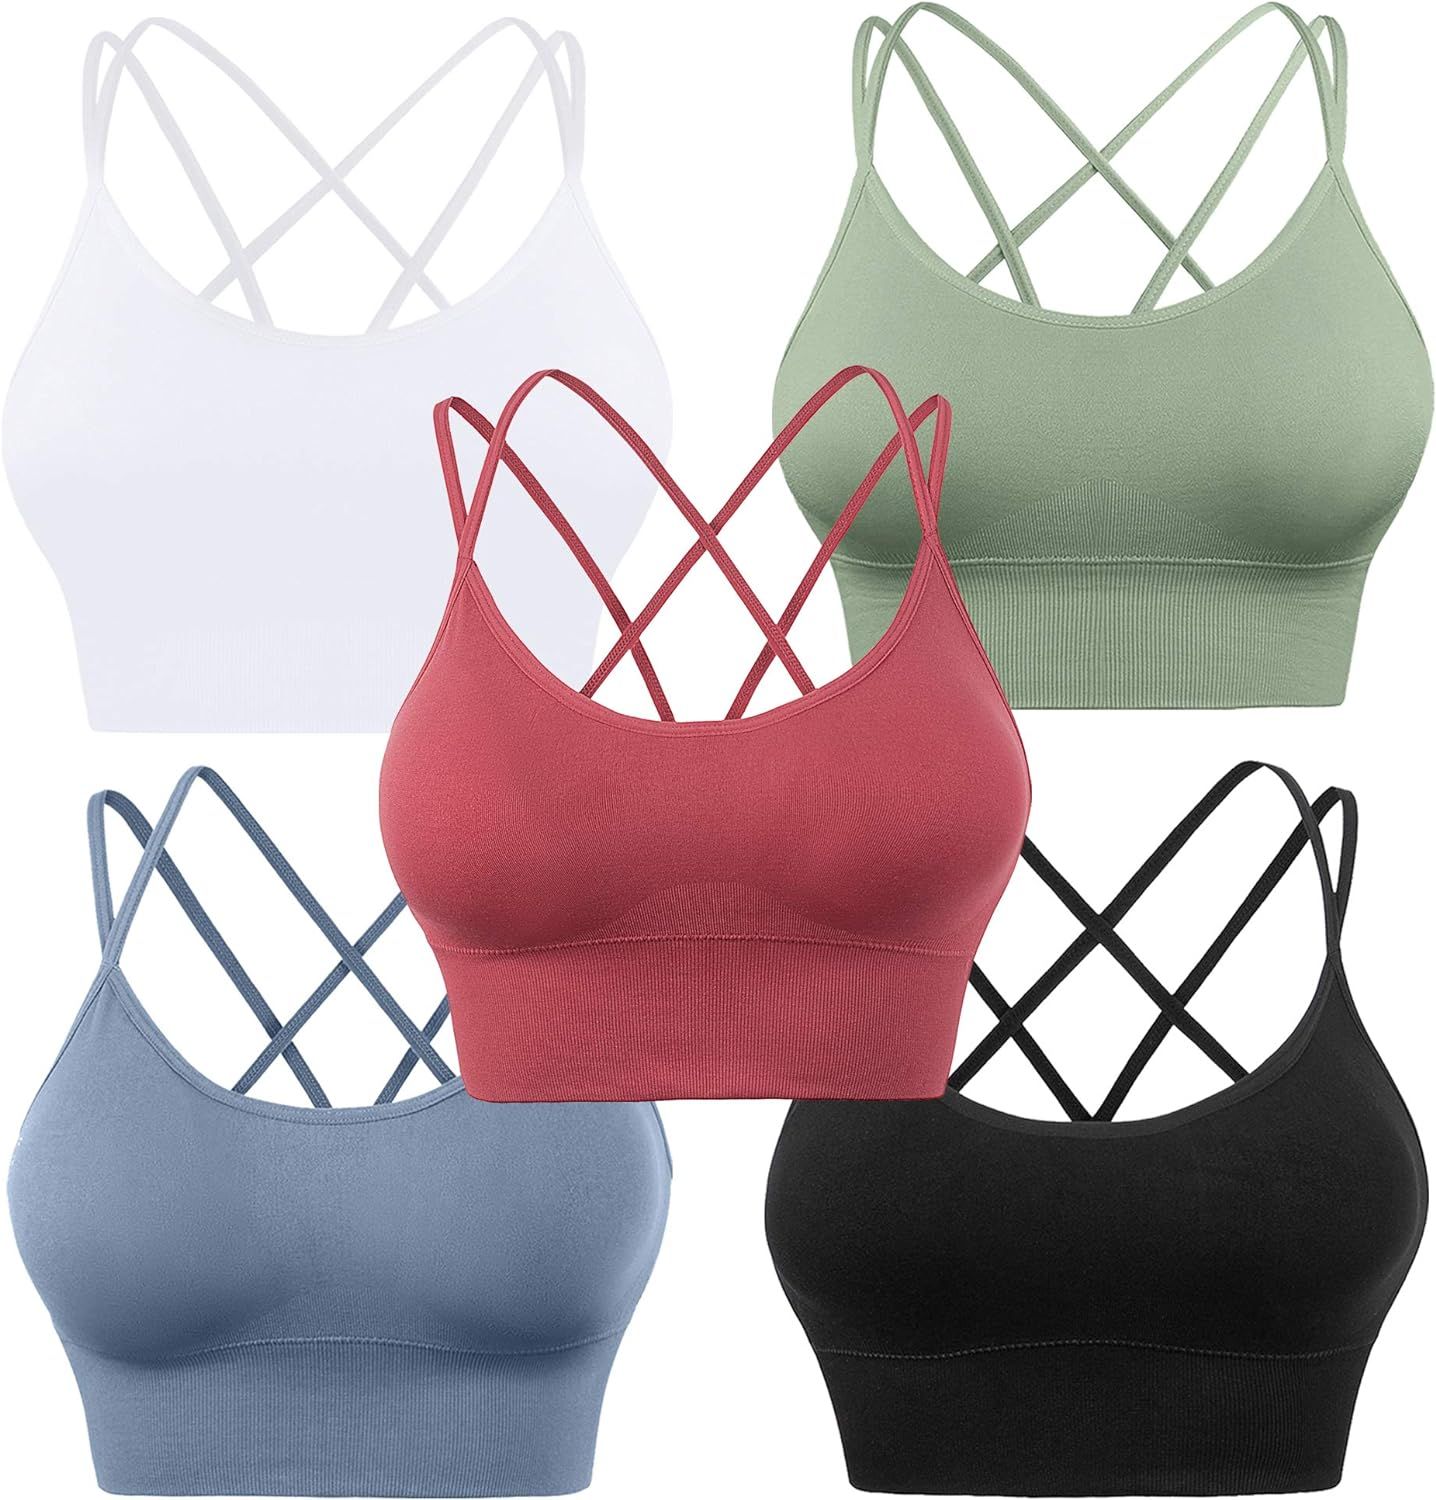 Evercute Cross Back Sport Bras Padded Strappy Criss Cross Cropped Bras for Yoga Workout Fitness | Amazon (US)